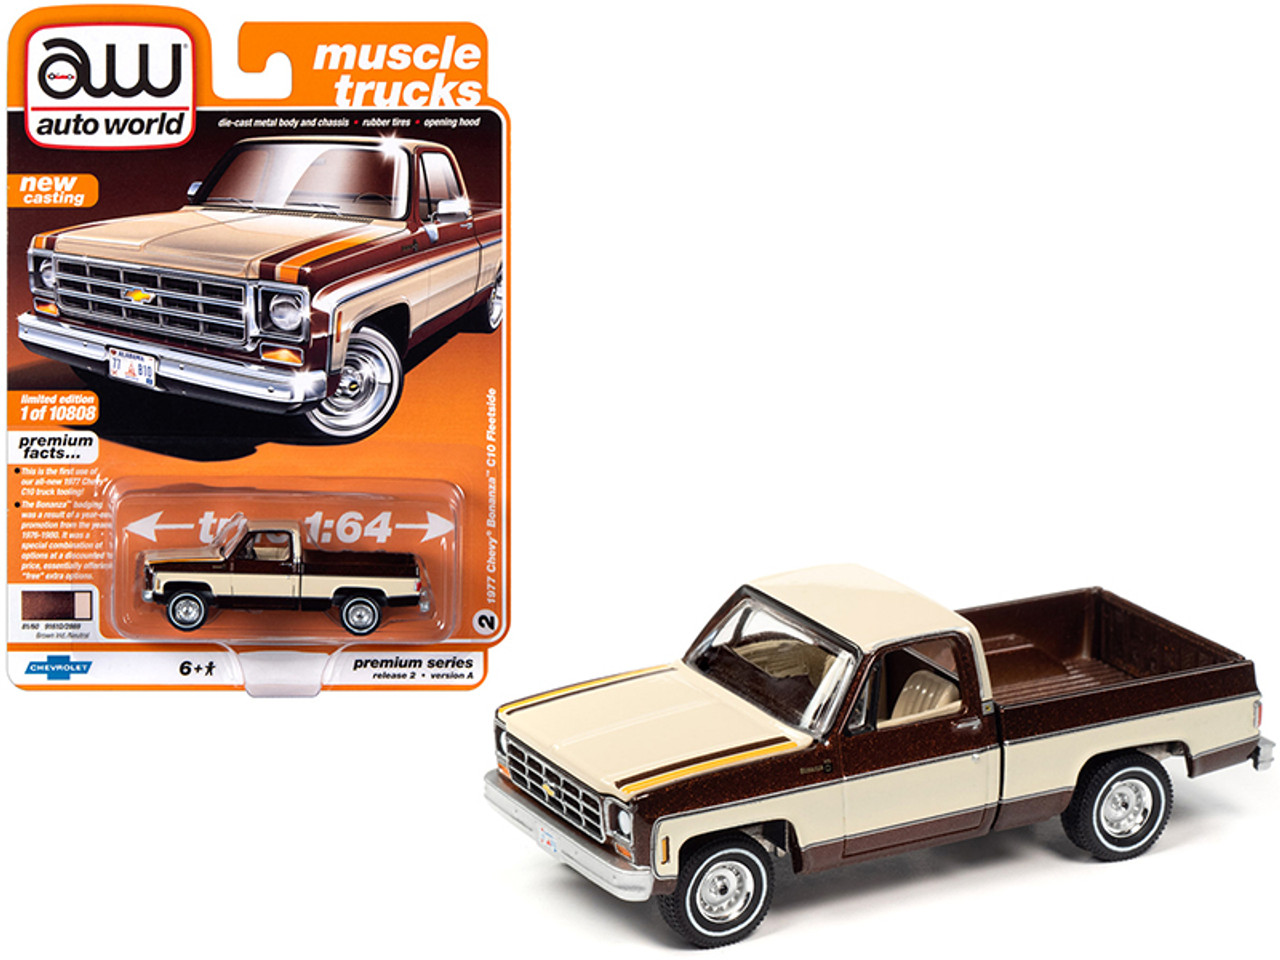 1977 Chevrolet Bonanza C10 Fleetside Pickup Truck Dark Brown Metallic and Cream with Yellow Stripes "Muscle Trucks" Limited Edition to 10,808 pieces Worldwide 1/64 Diecast Model Car by Autoworld